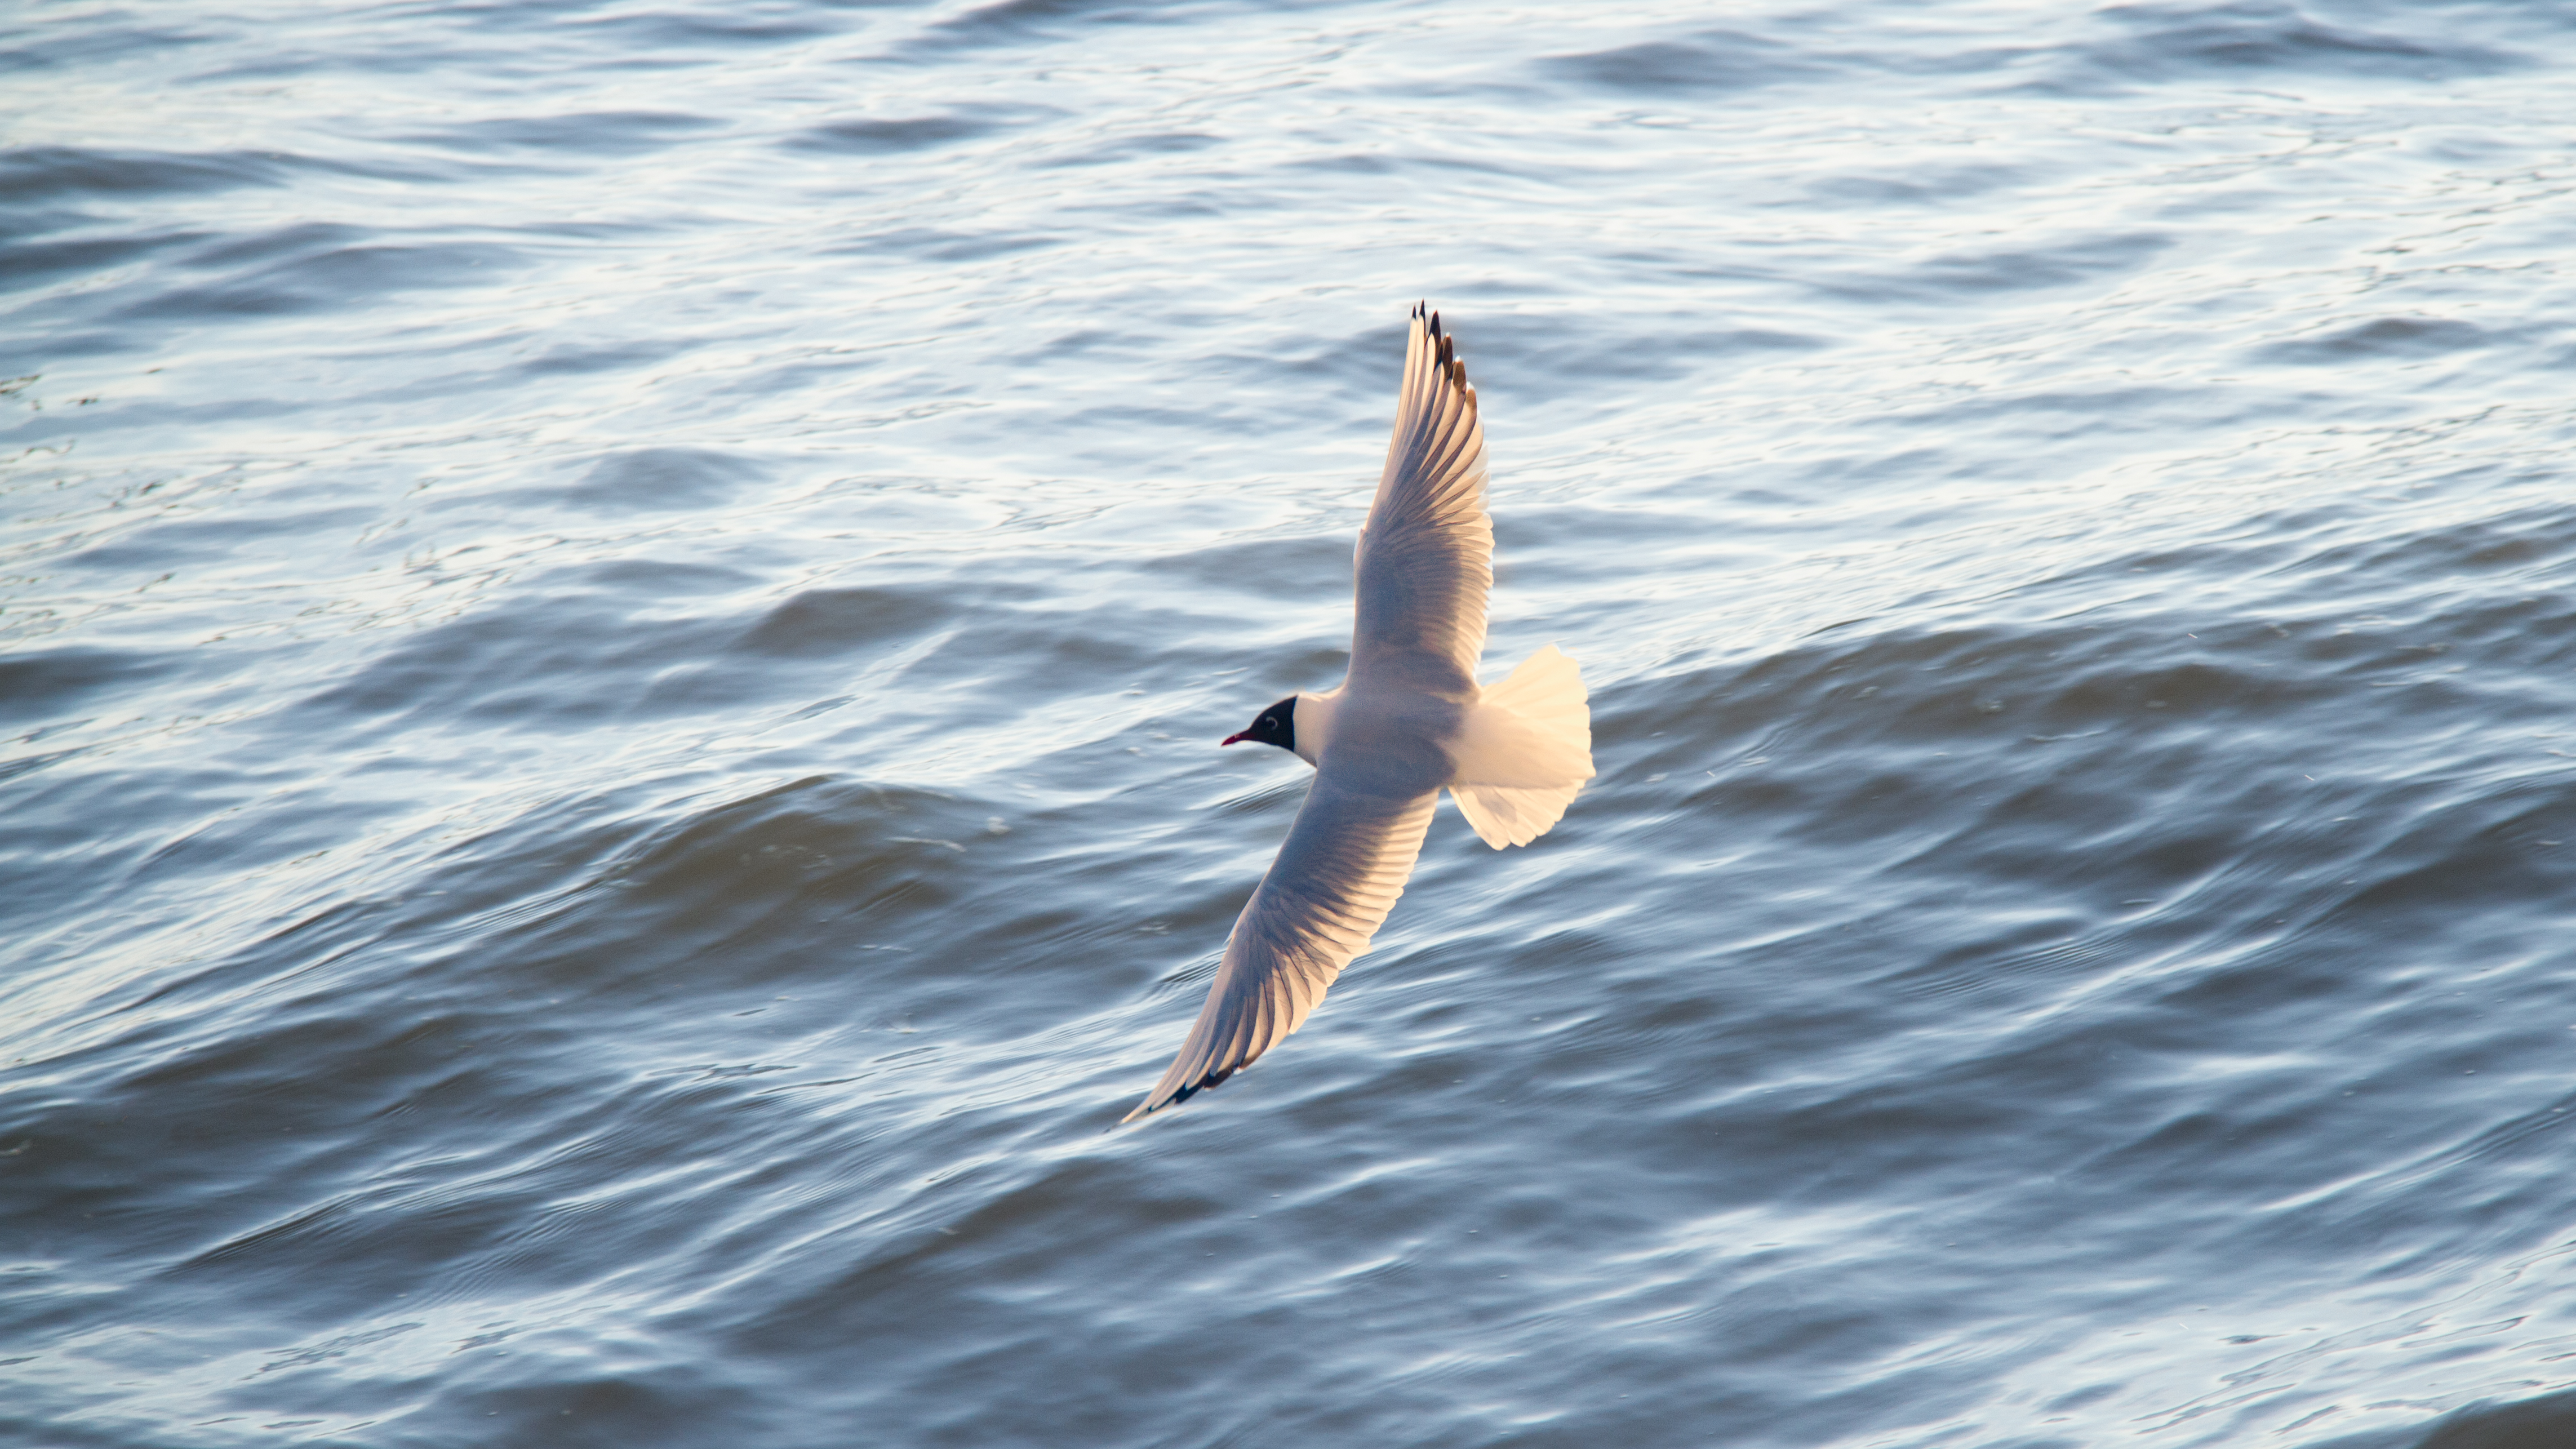 Seagull flying over the ocean photo